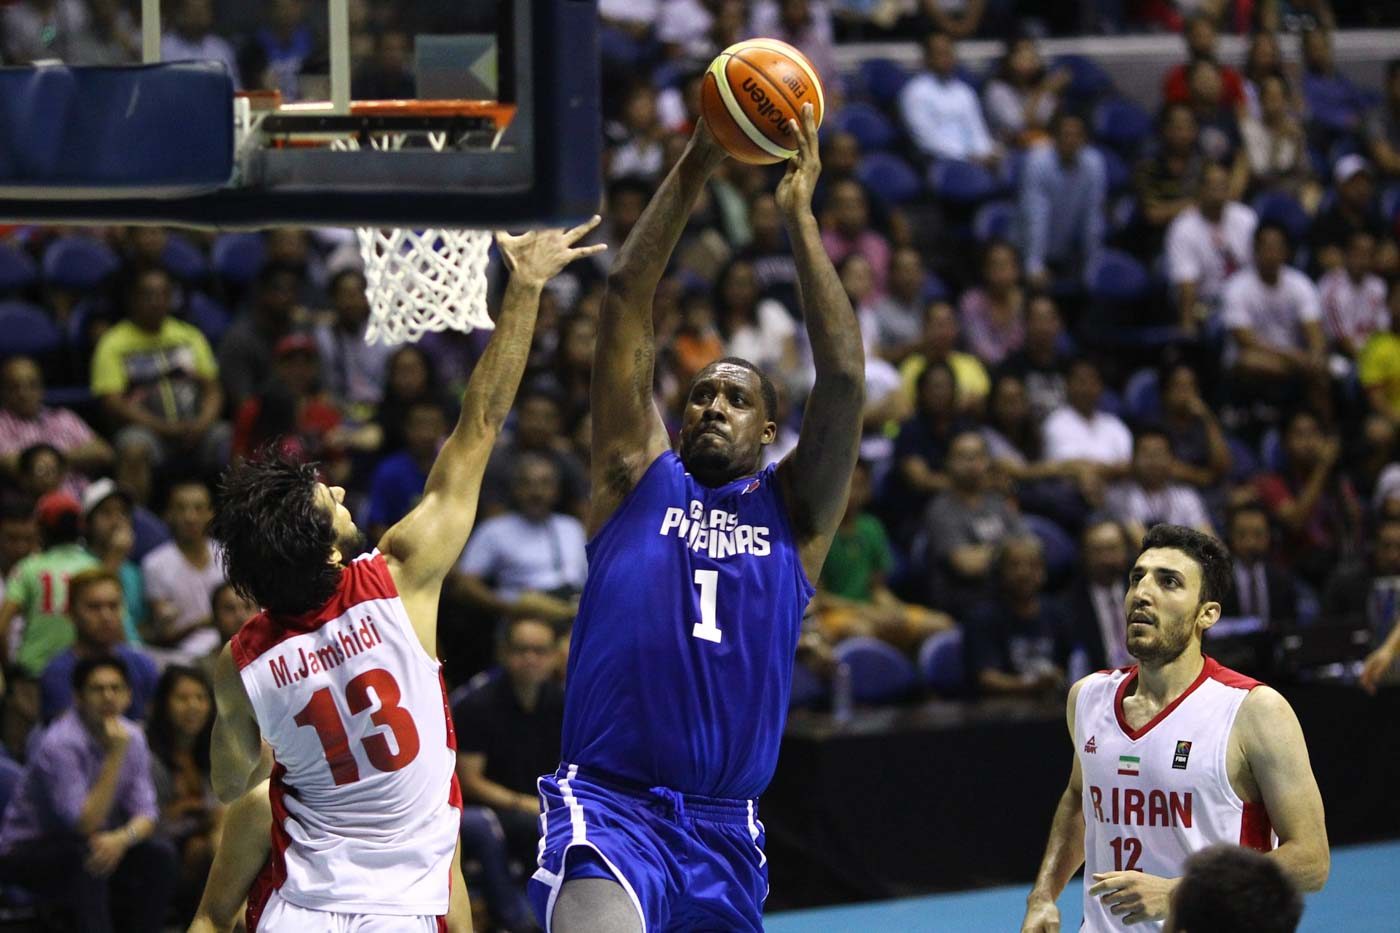 Gilas avoids late collapse to win tune-up against Iran